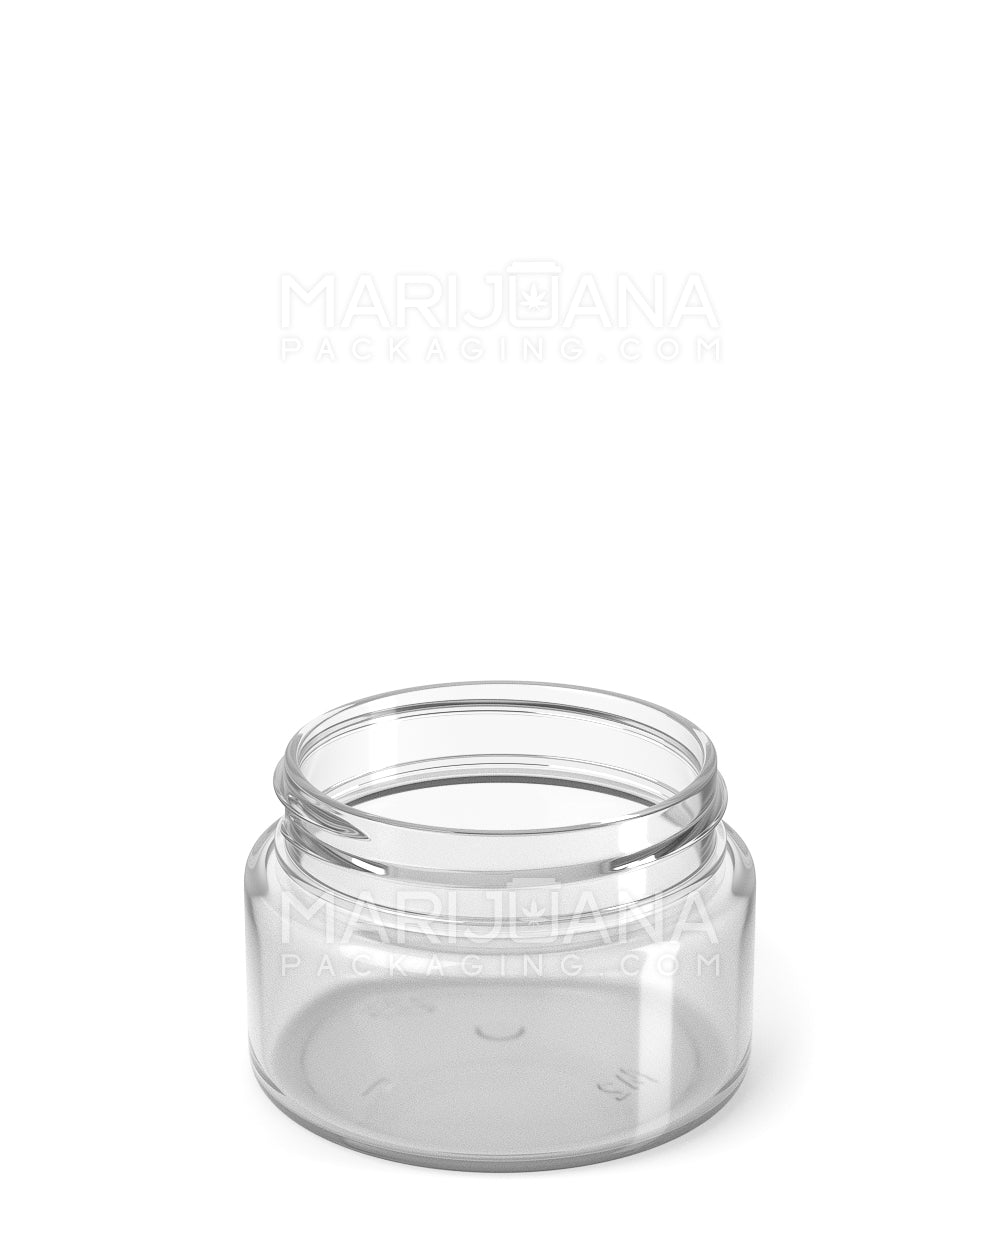 Straight Sided Clear Plastic Jars | 53mm - 2oz - 200 Count - 2